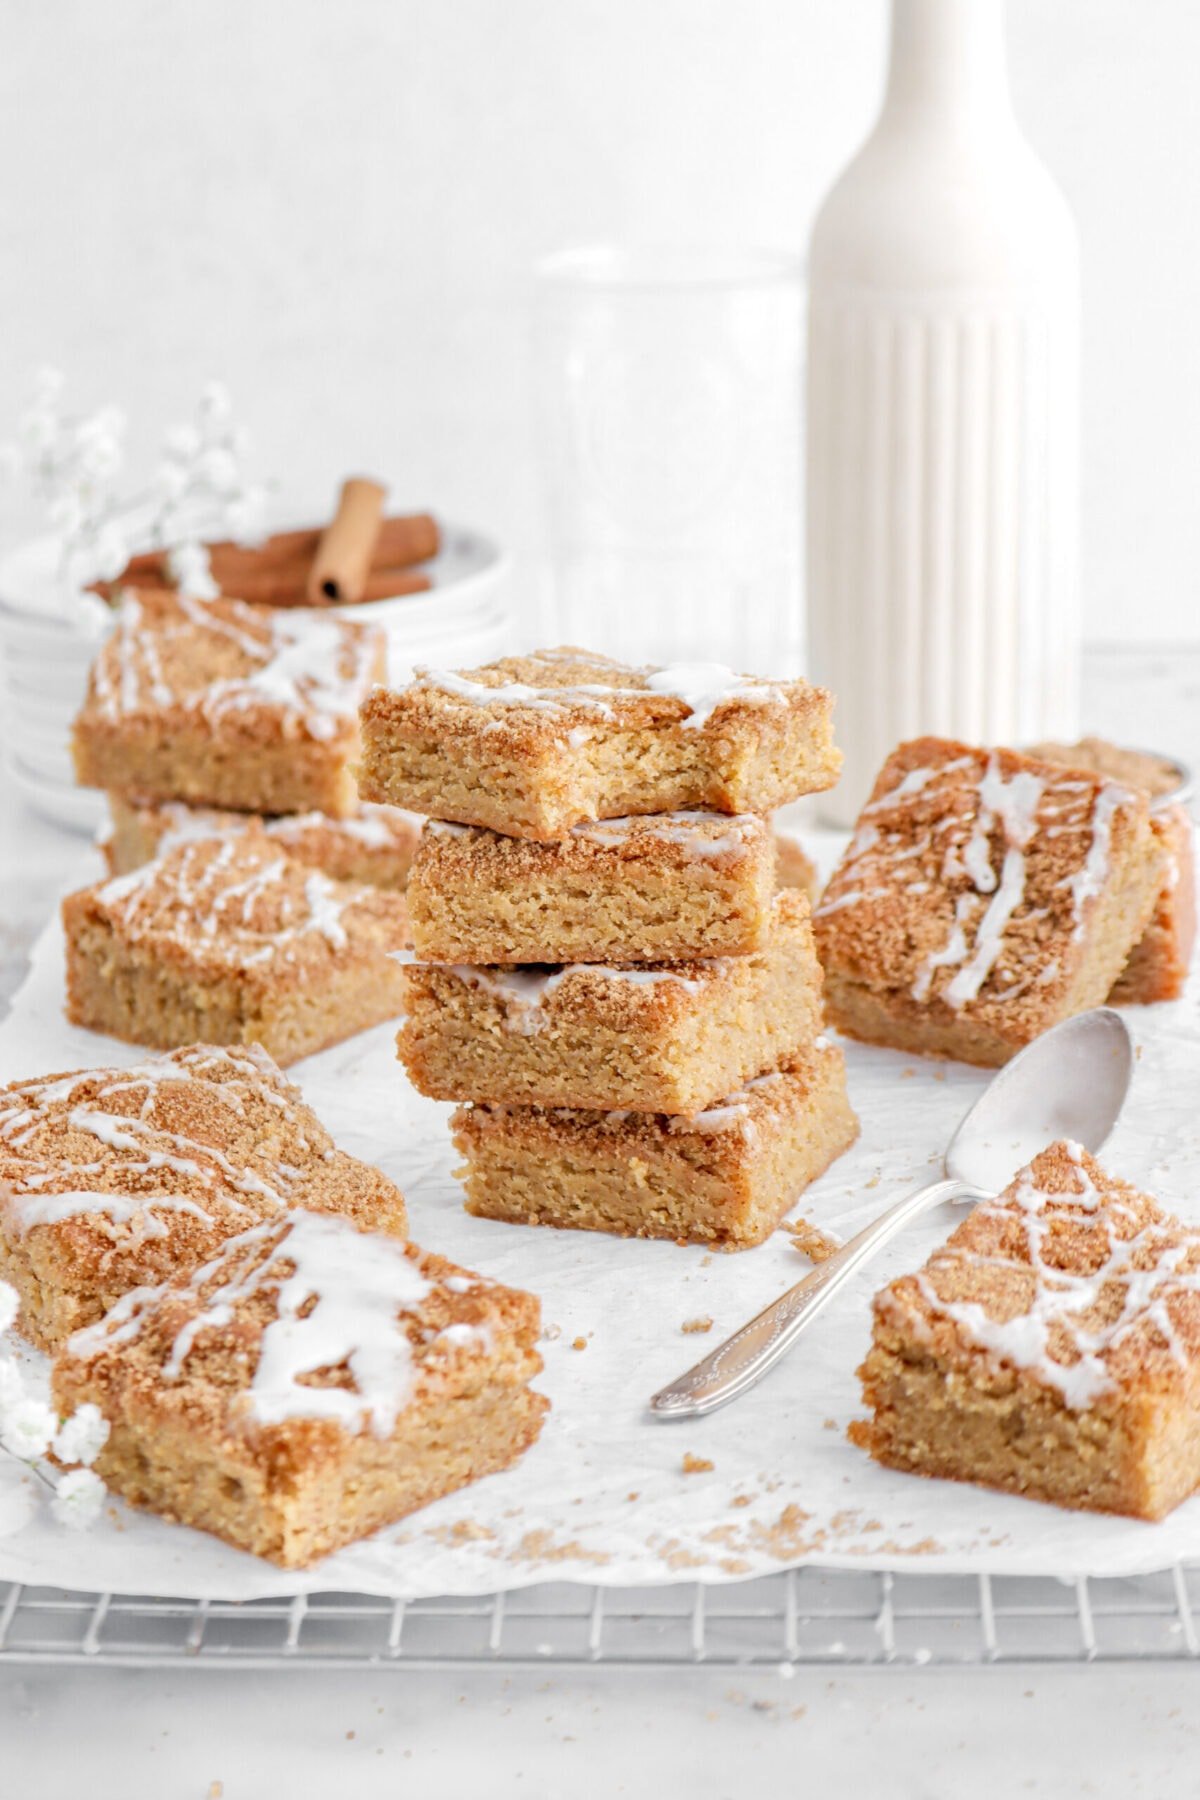 four stacked blondies with top blondie missing a bite on parchment lined cooling rack with more blondies around, a vase, and stack of plates behind.